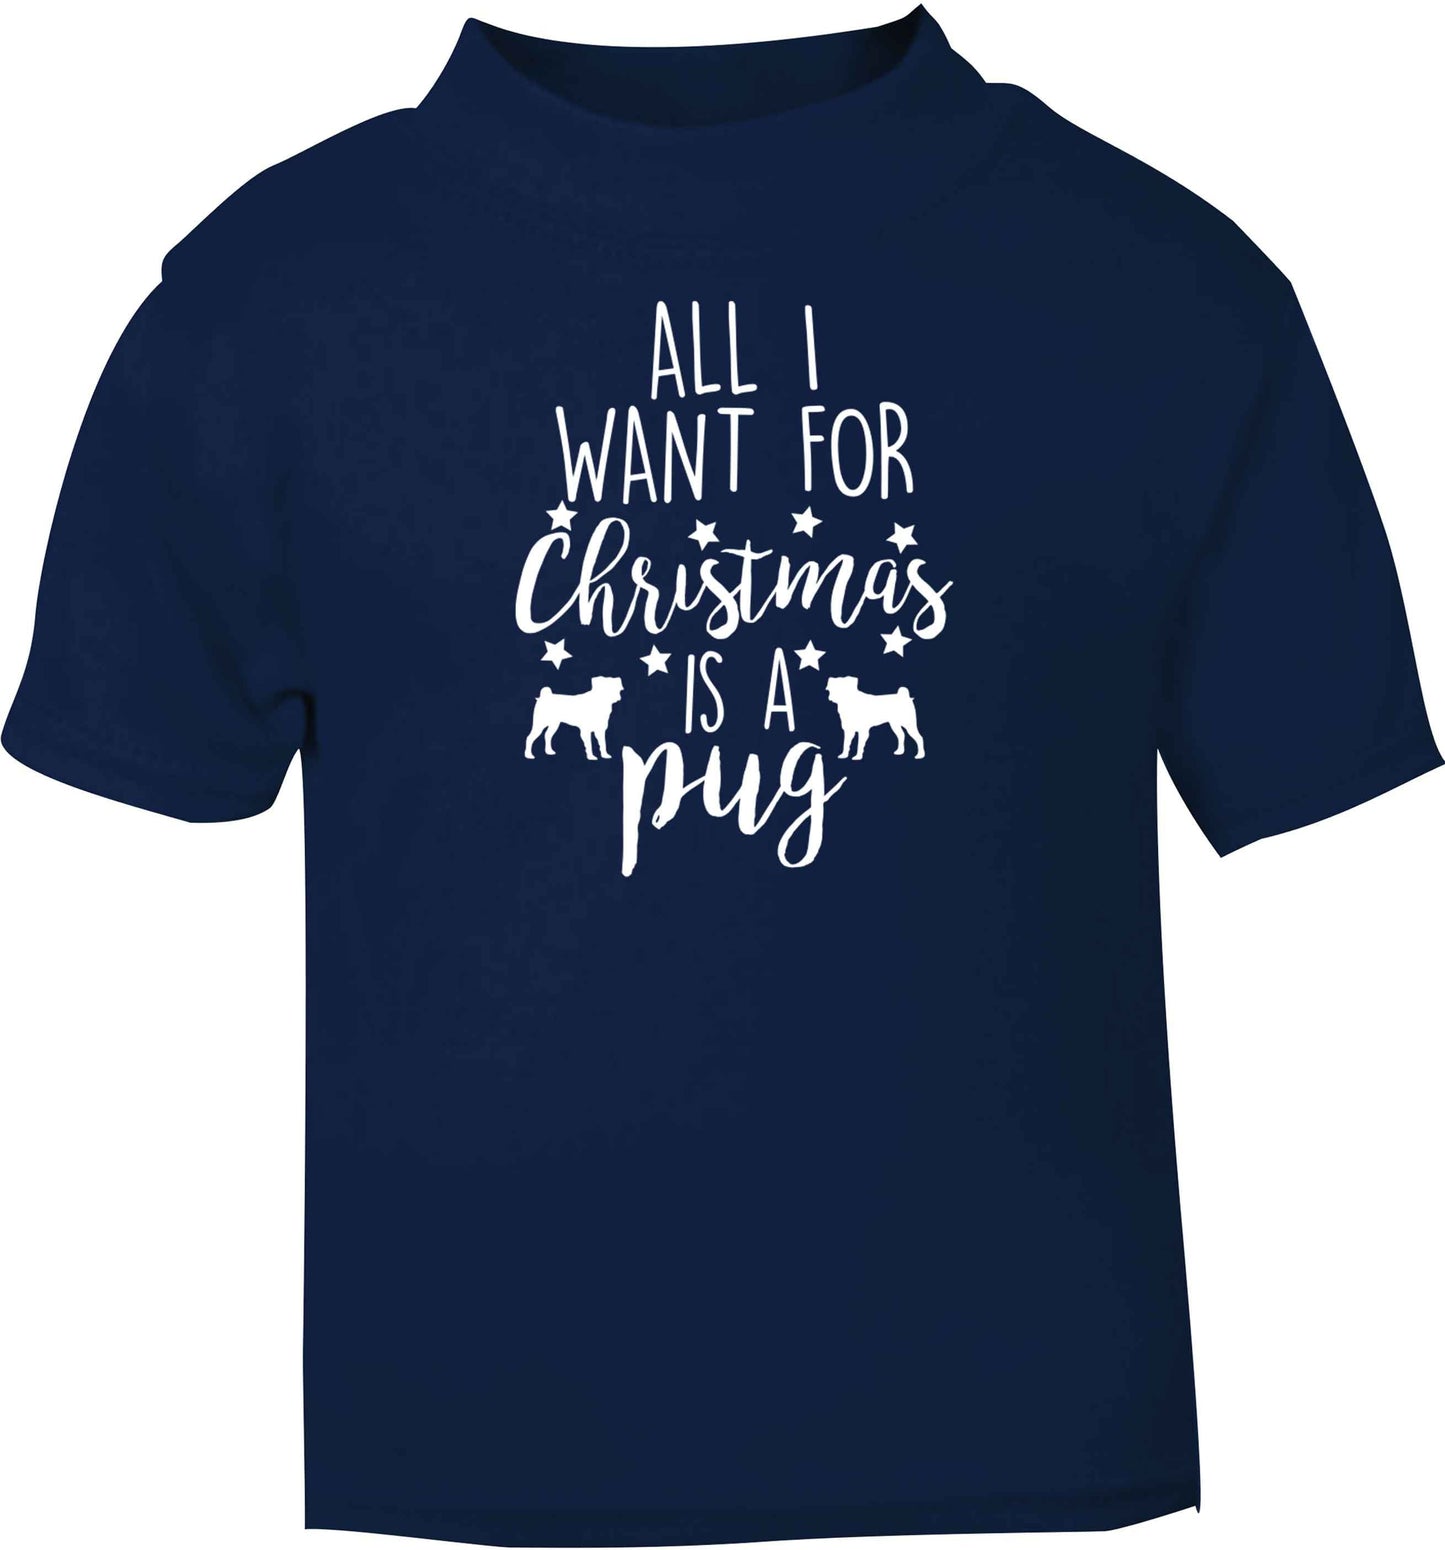 All I want for Christmas is a pug navy baby toddler Tshirt 2 Years